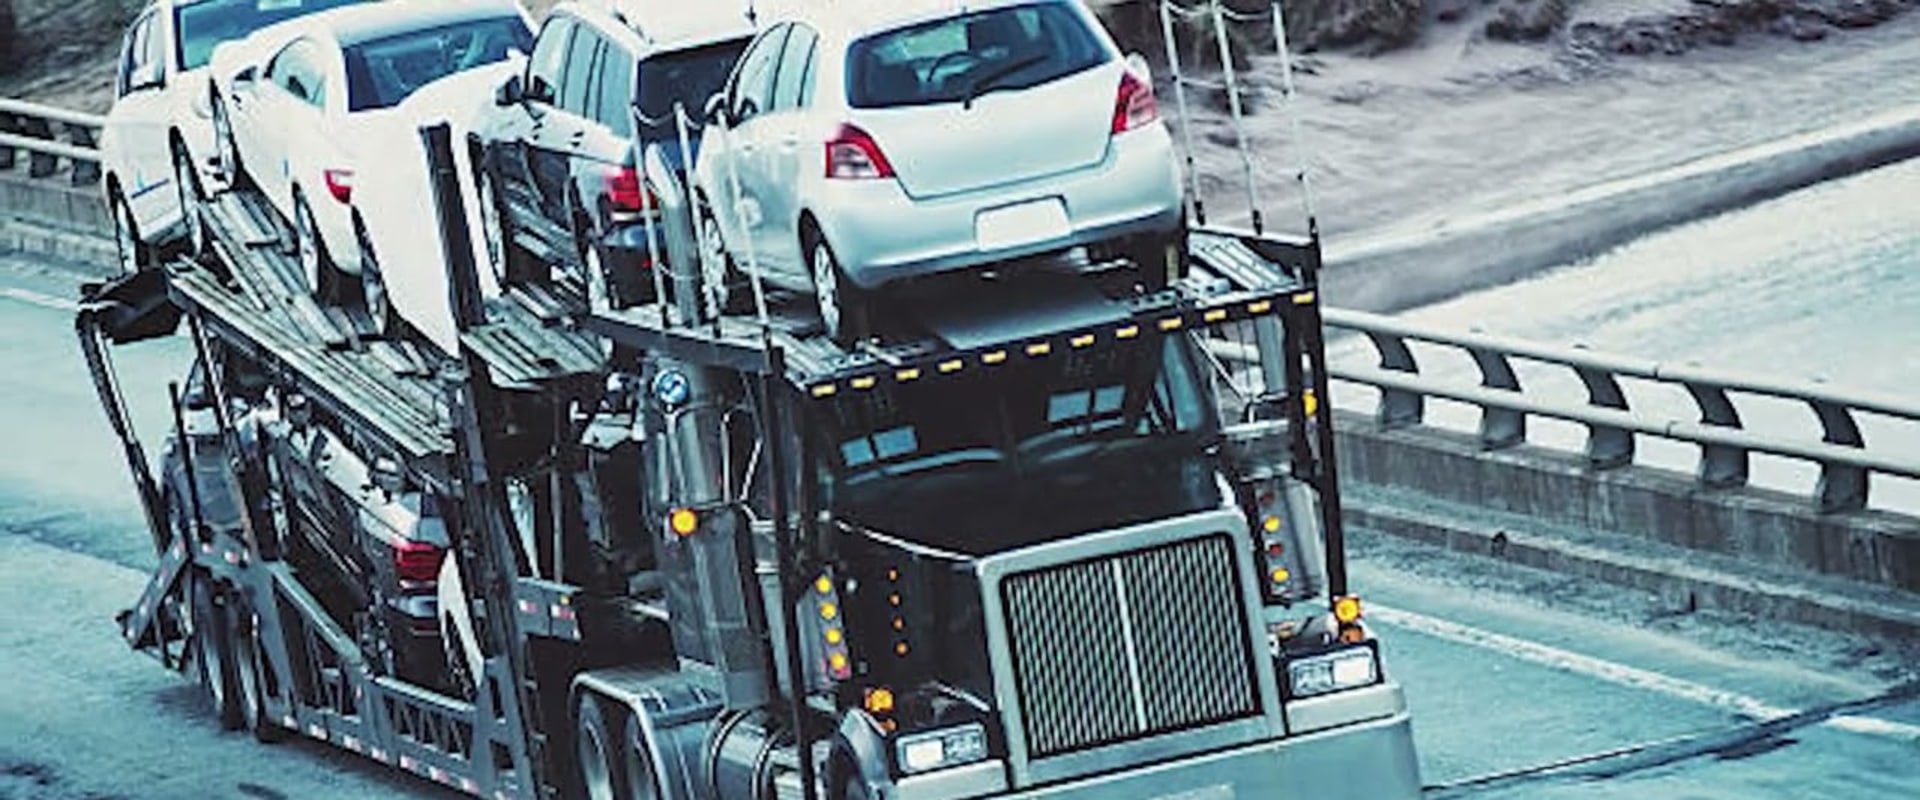 Auto Transport Companies Pennsylvania: A-1 Auto Transport Is Our Top Choice